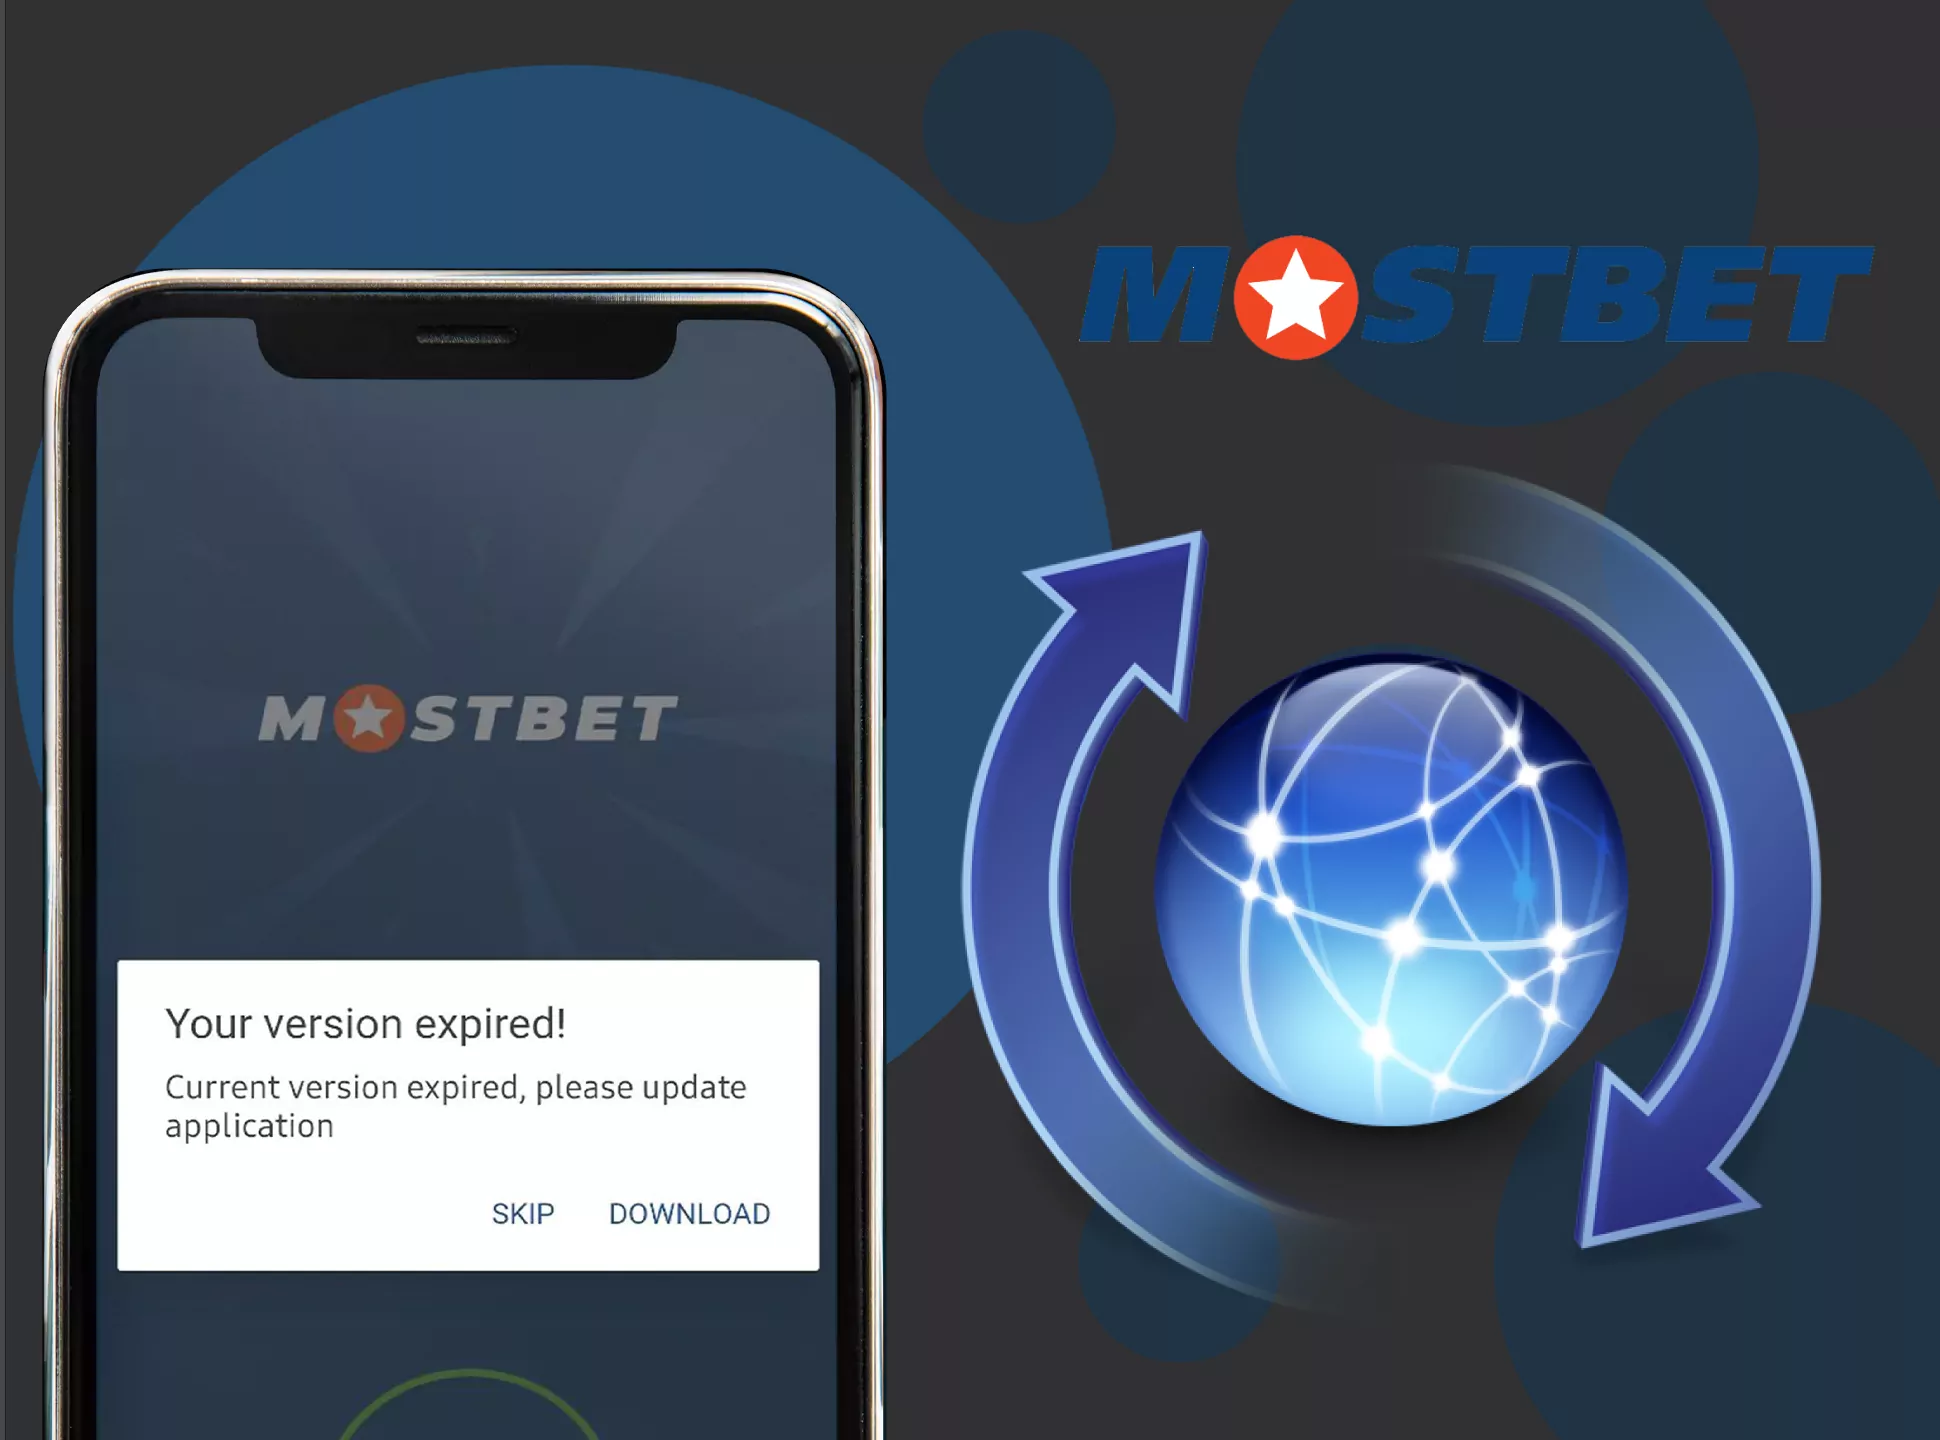 You should update the Mostbet app when you get a notification.